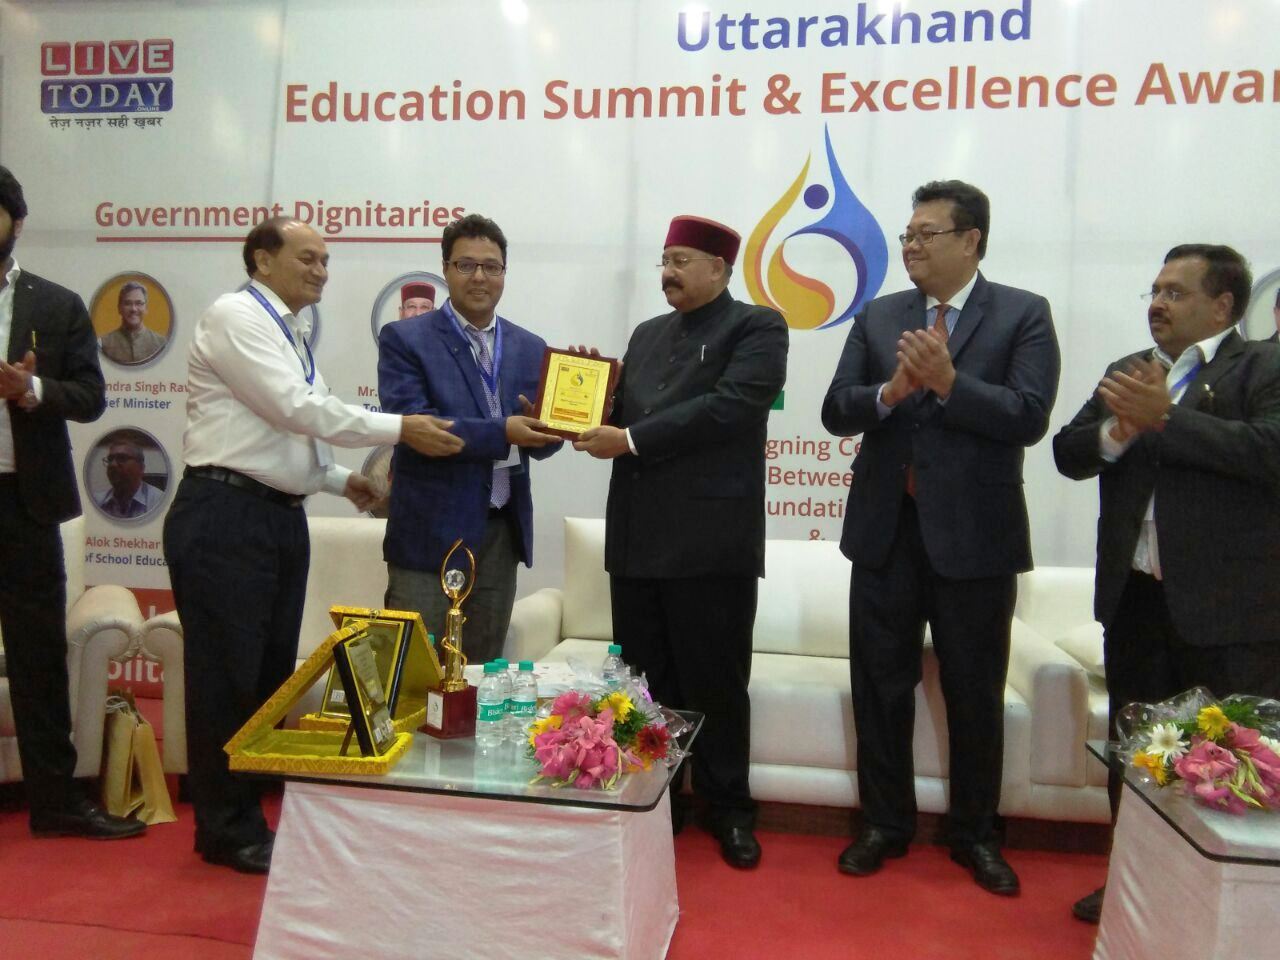 Education summit & Excellence Award